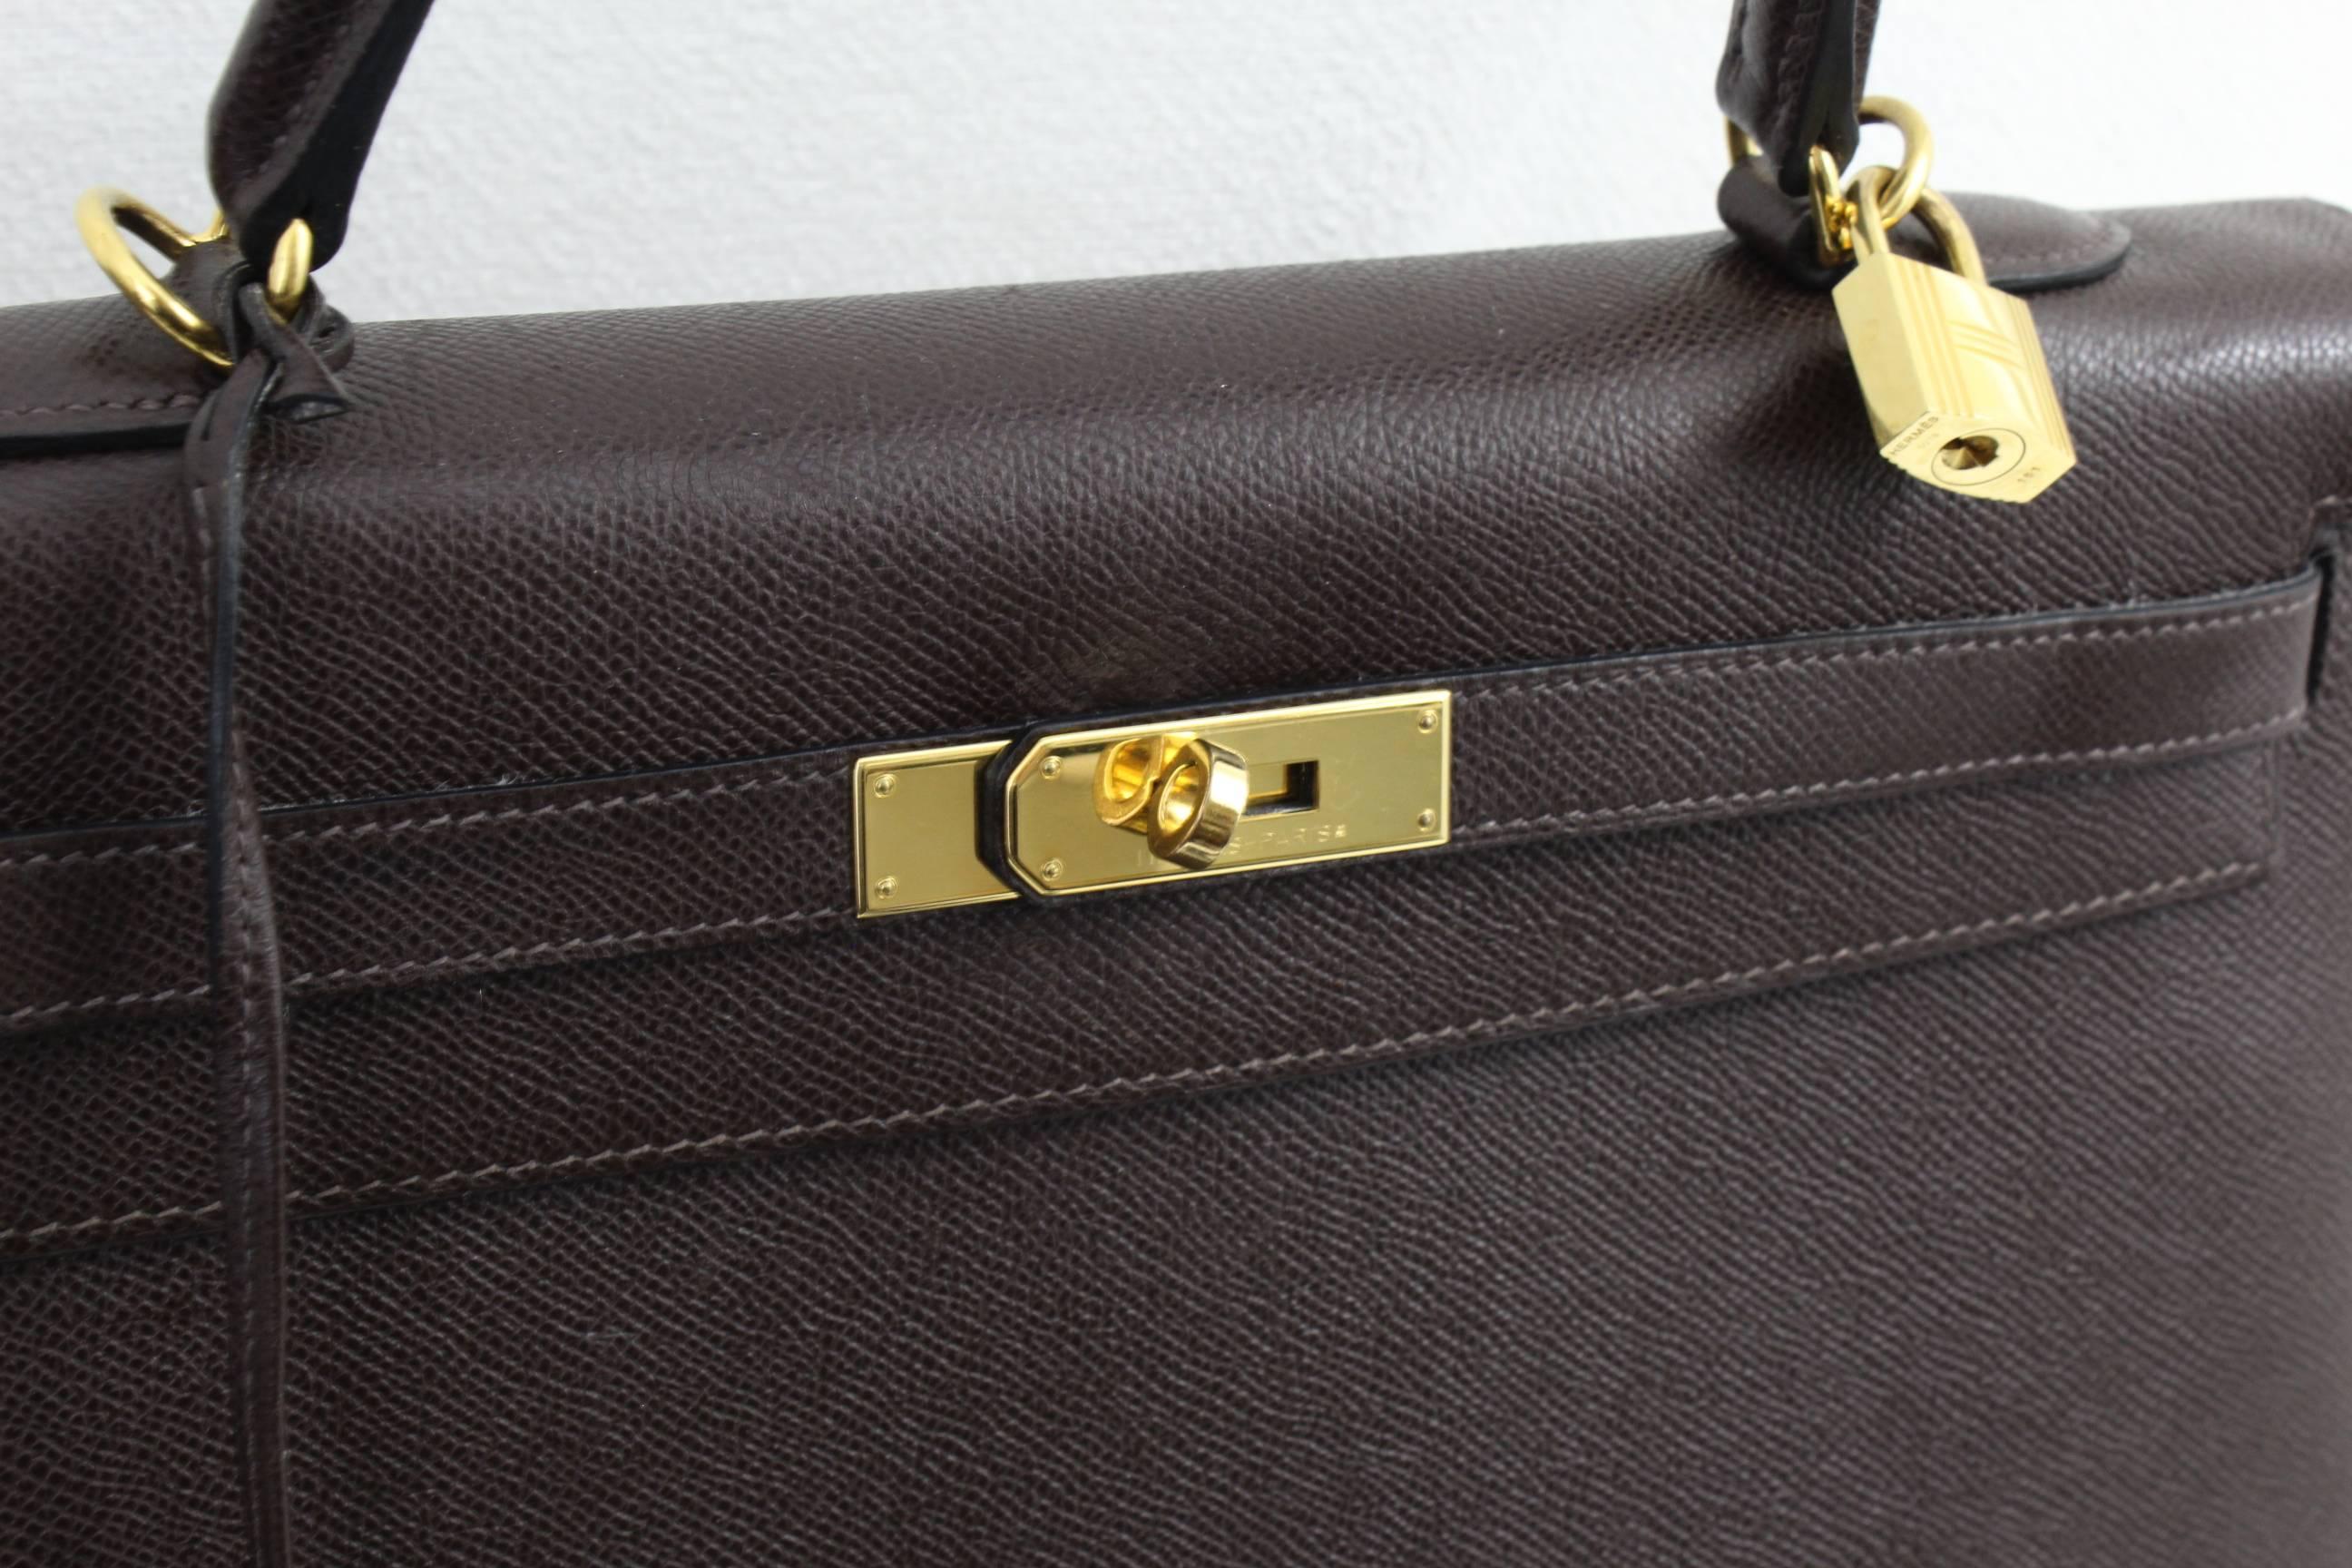 Really nice Hermes Kelly 35 Bag in Dak Brown Epson Leather.

Comes with shoulder strap, key, clochette.

Good condition but the bag has been used and it has some light marks on corners and leather in the fornt typical from the use in Epson leather.